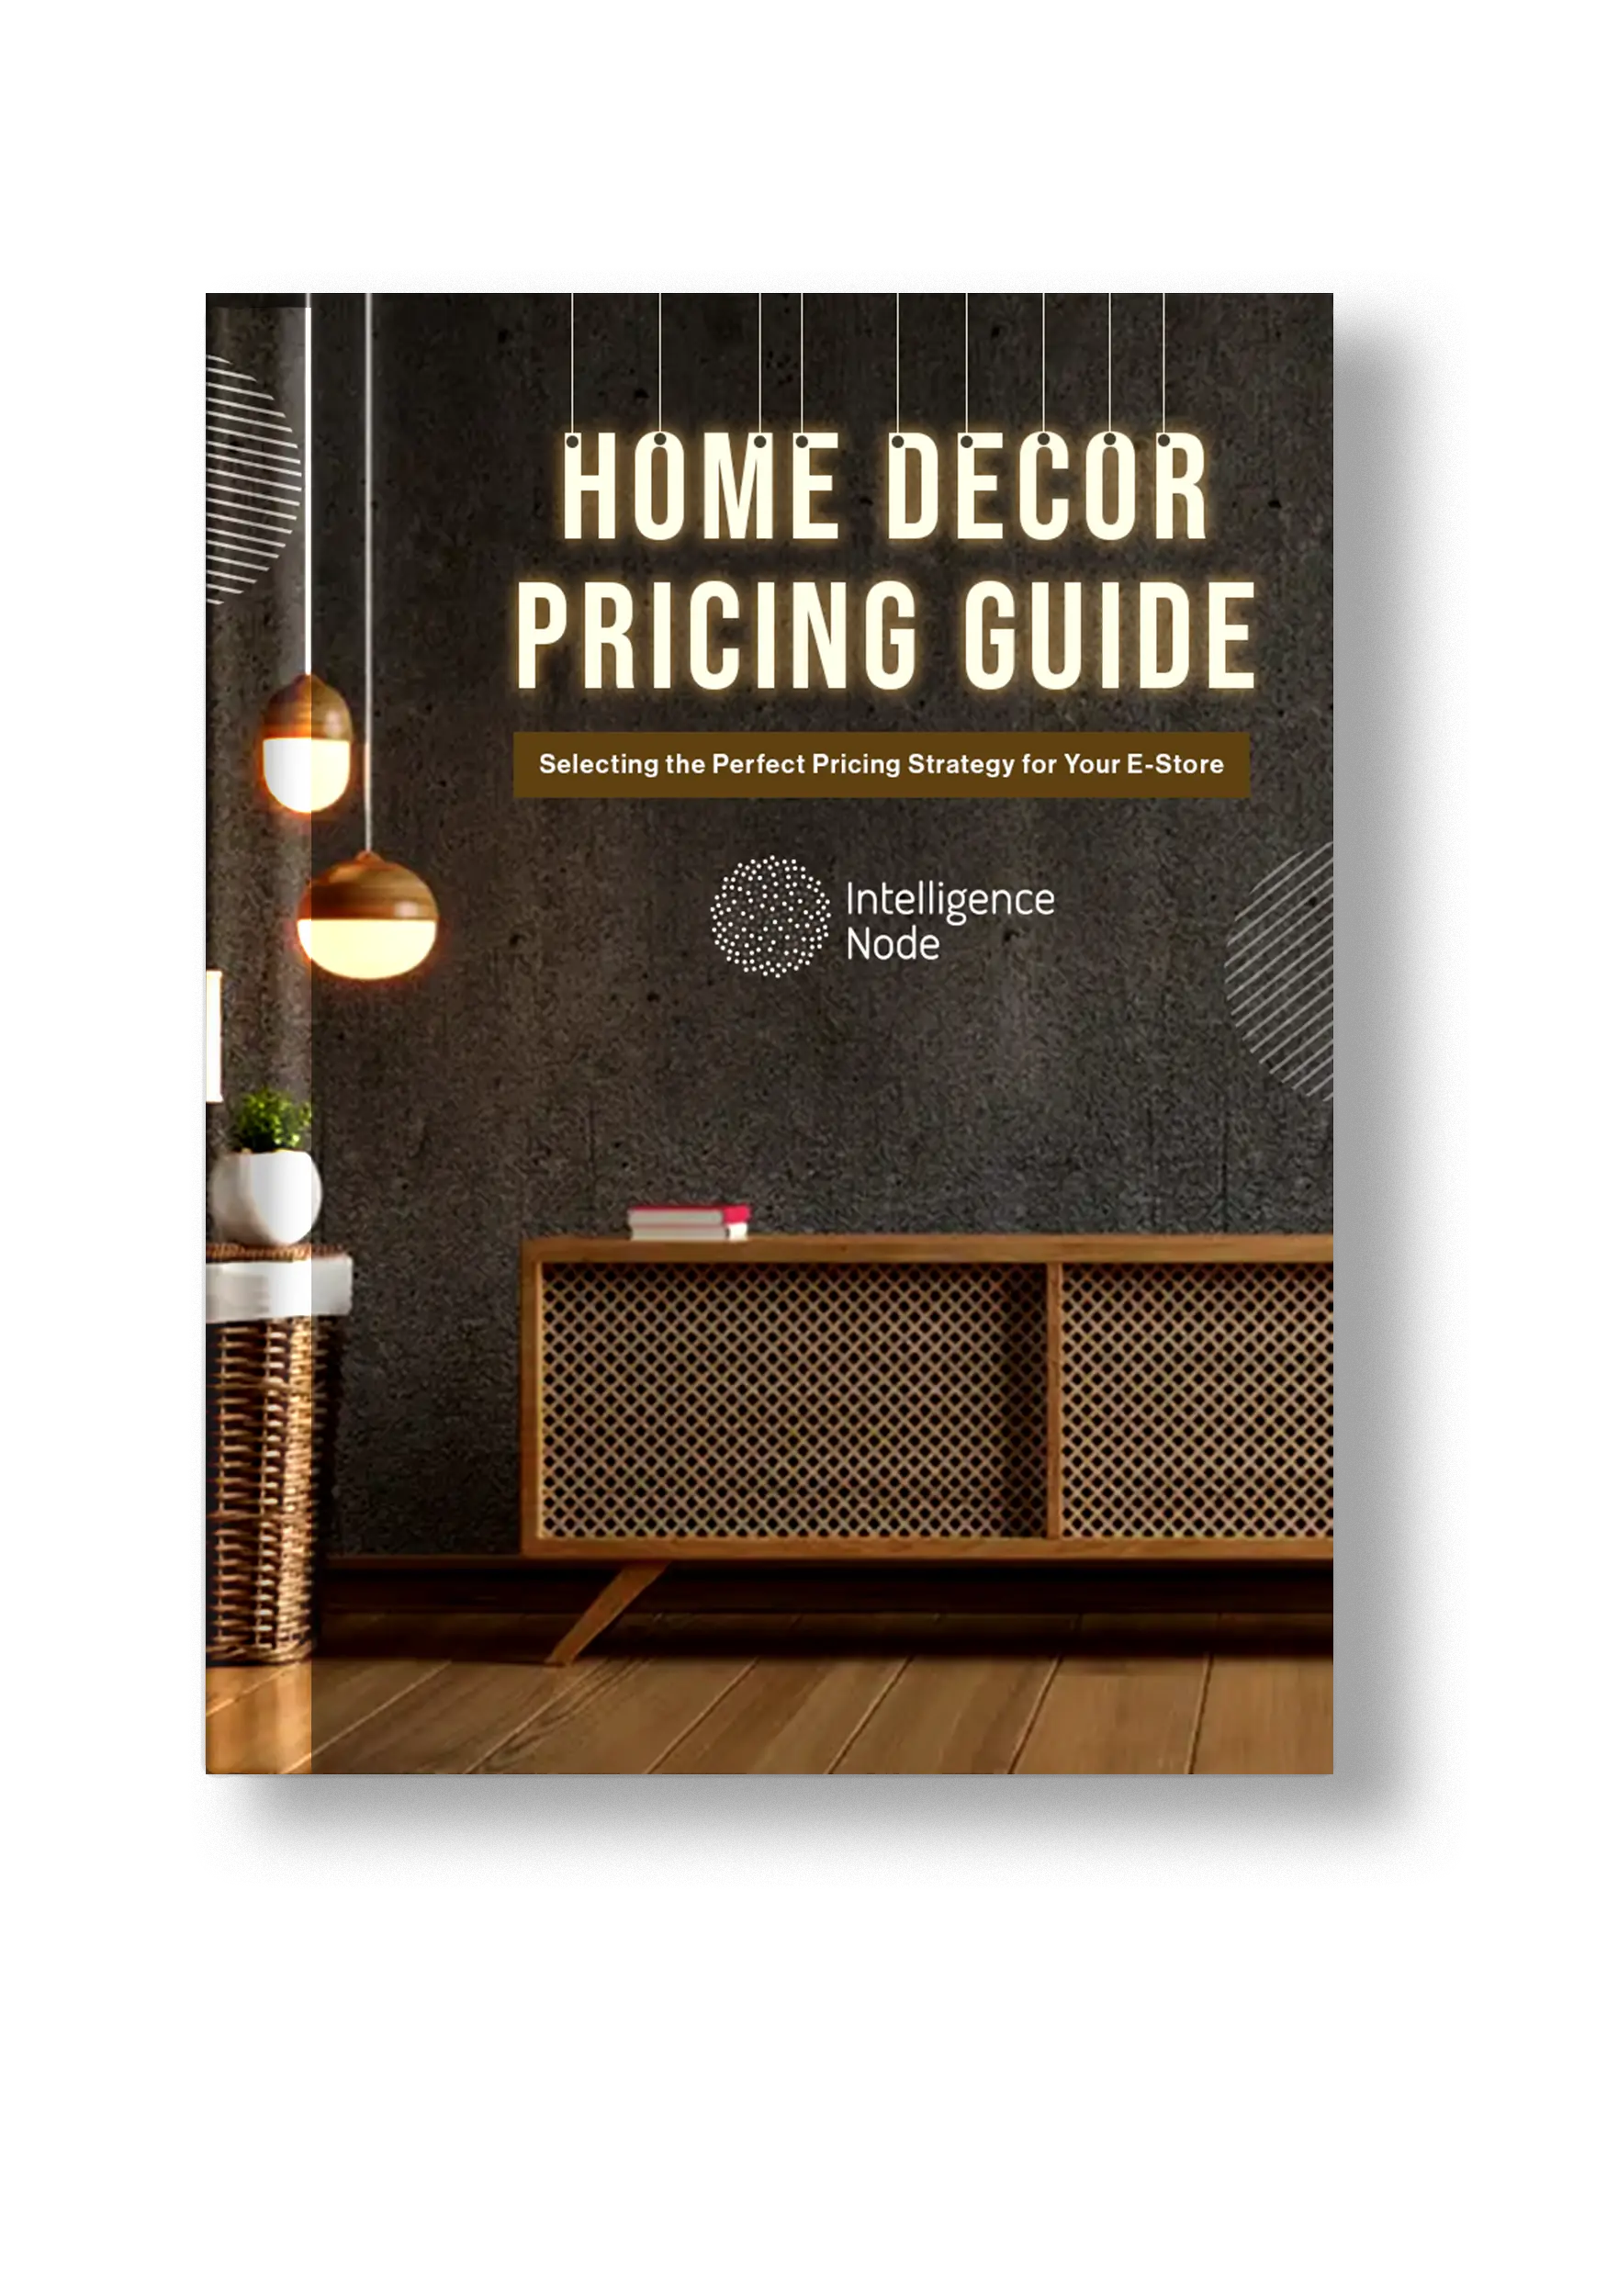 Home Decor book cover PNG